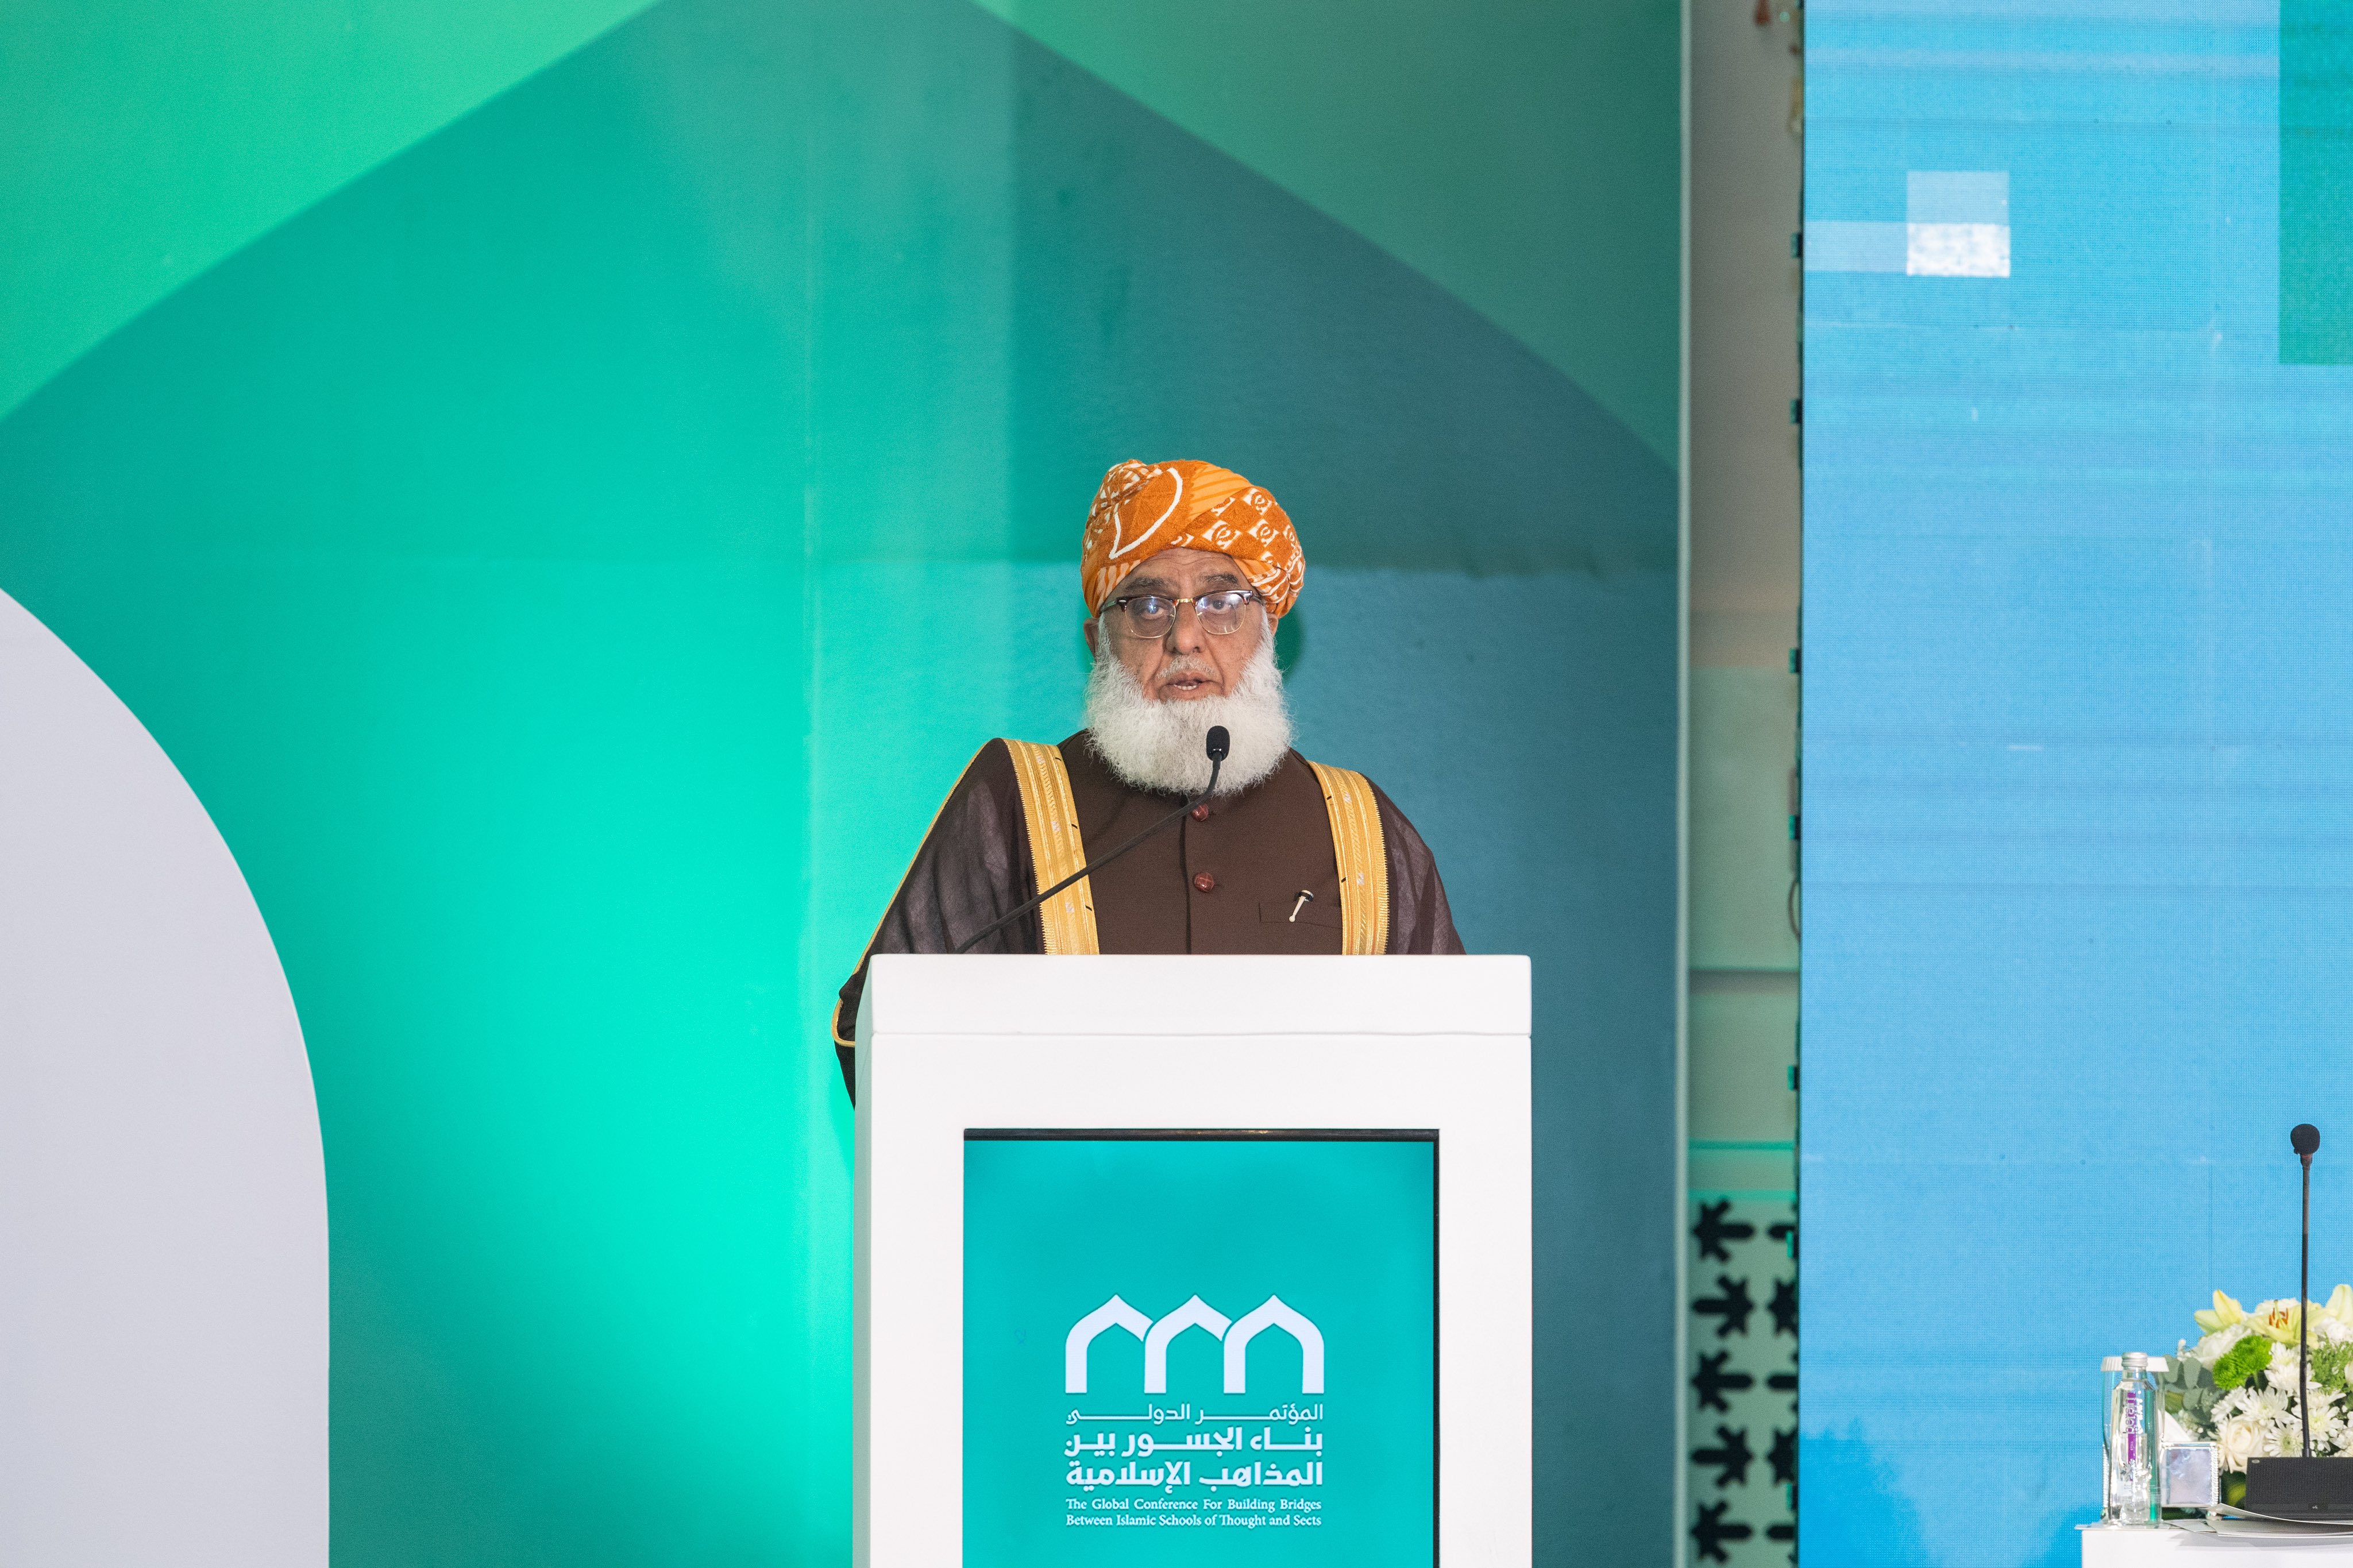 His Eminence Sheikh Fazl-ur-Rahman bin Mufti Mahmoud, Amir of the Muslim Ulema Association in Pakistan, at the opening ceremony of the Global Conference for Building Bridges between Islamic Schools of Thought and Sects: 